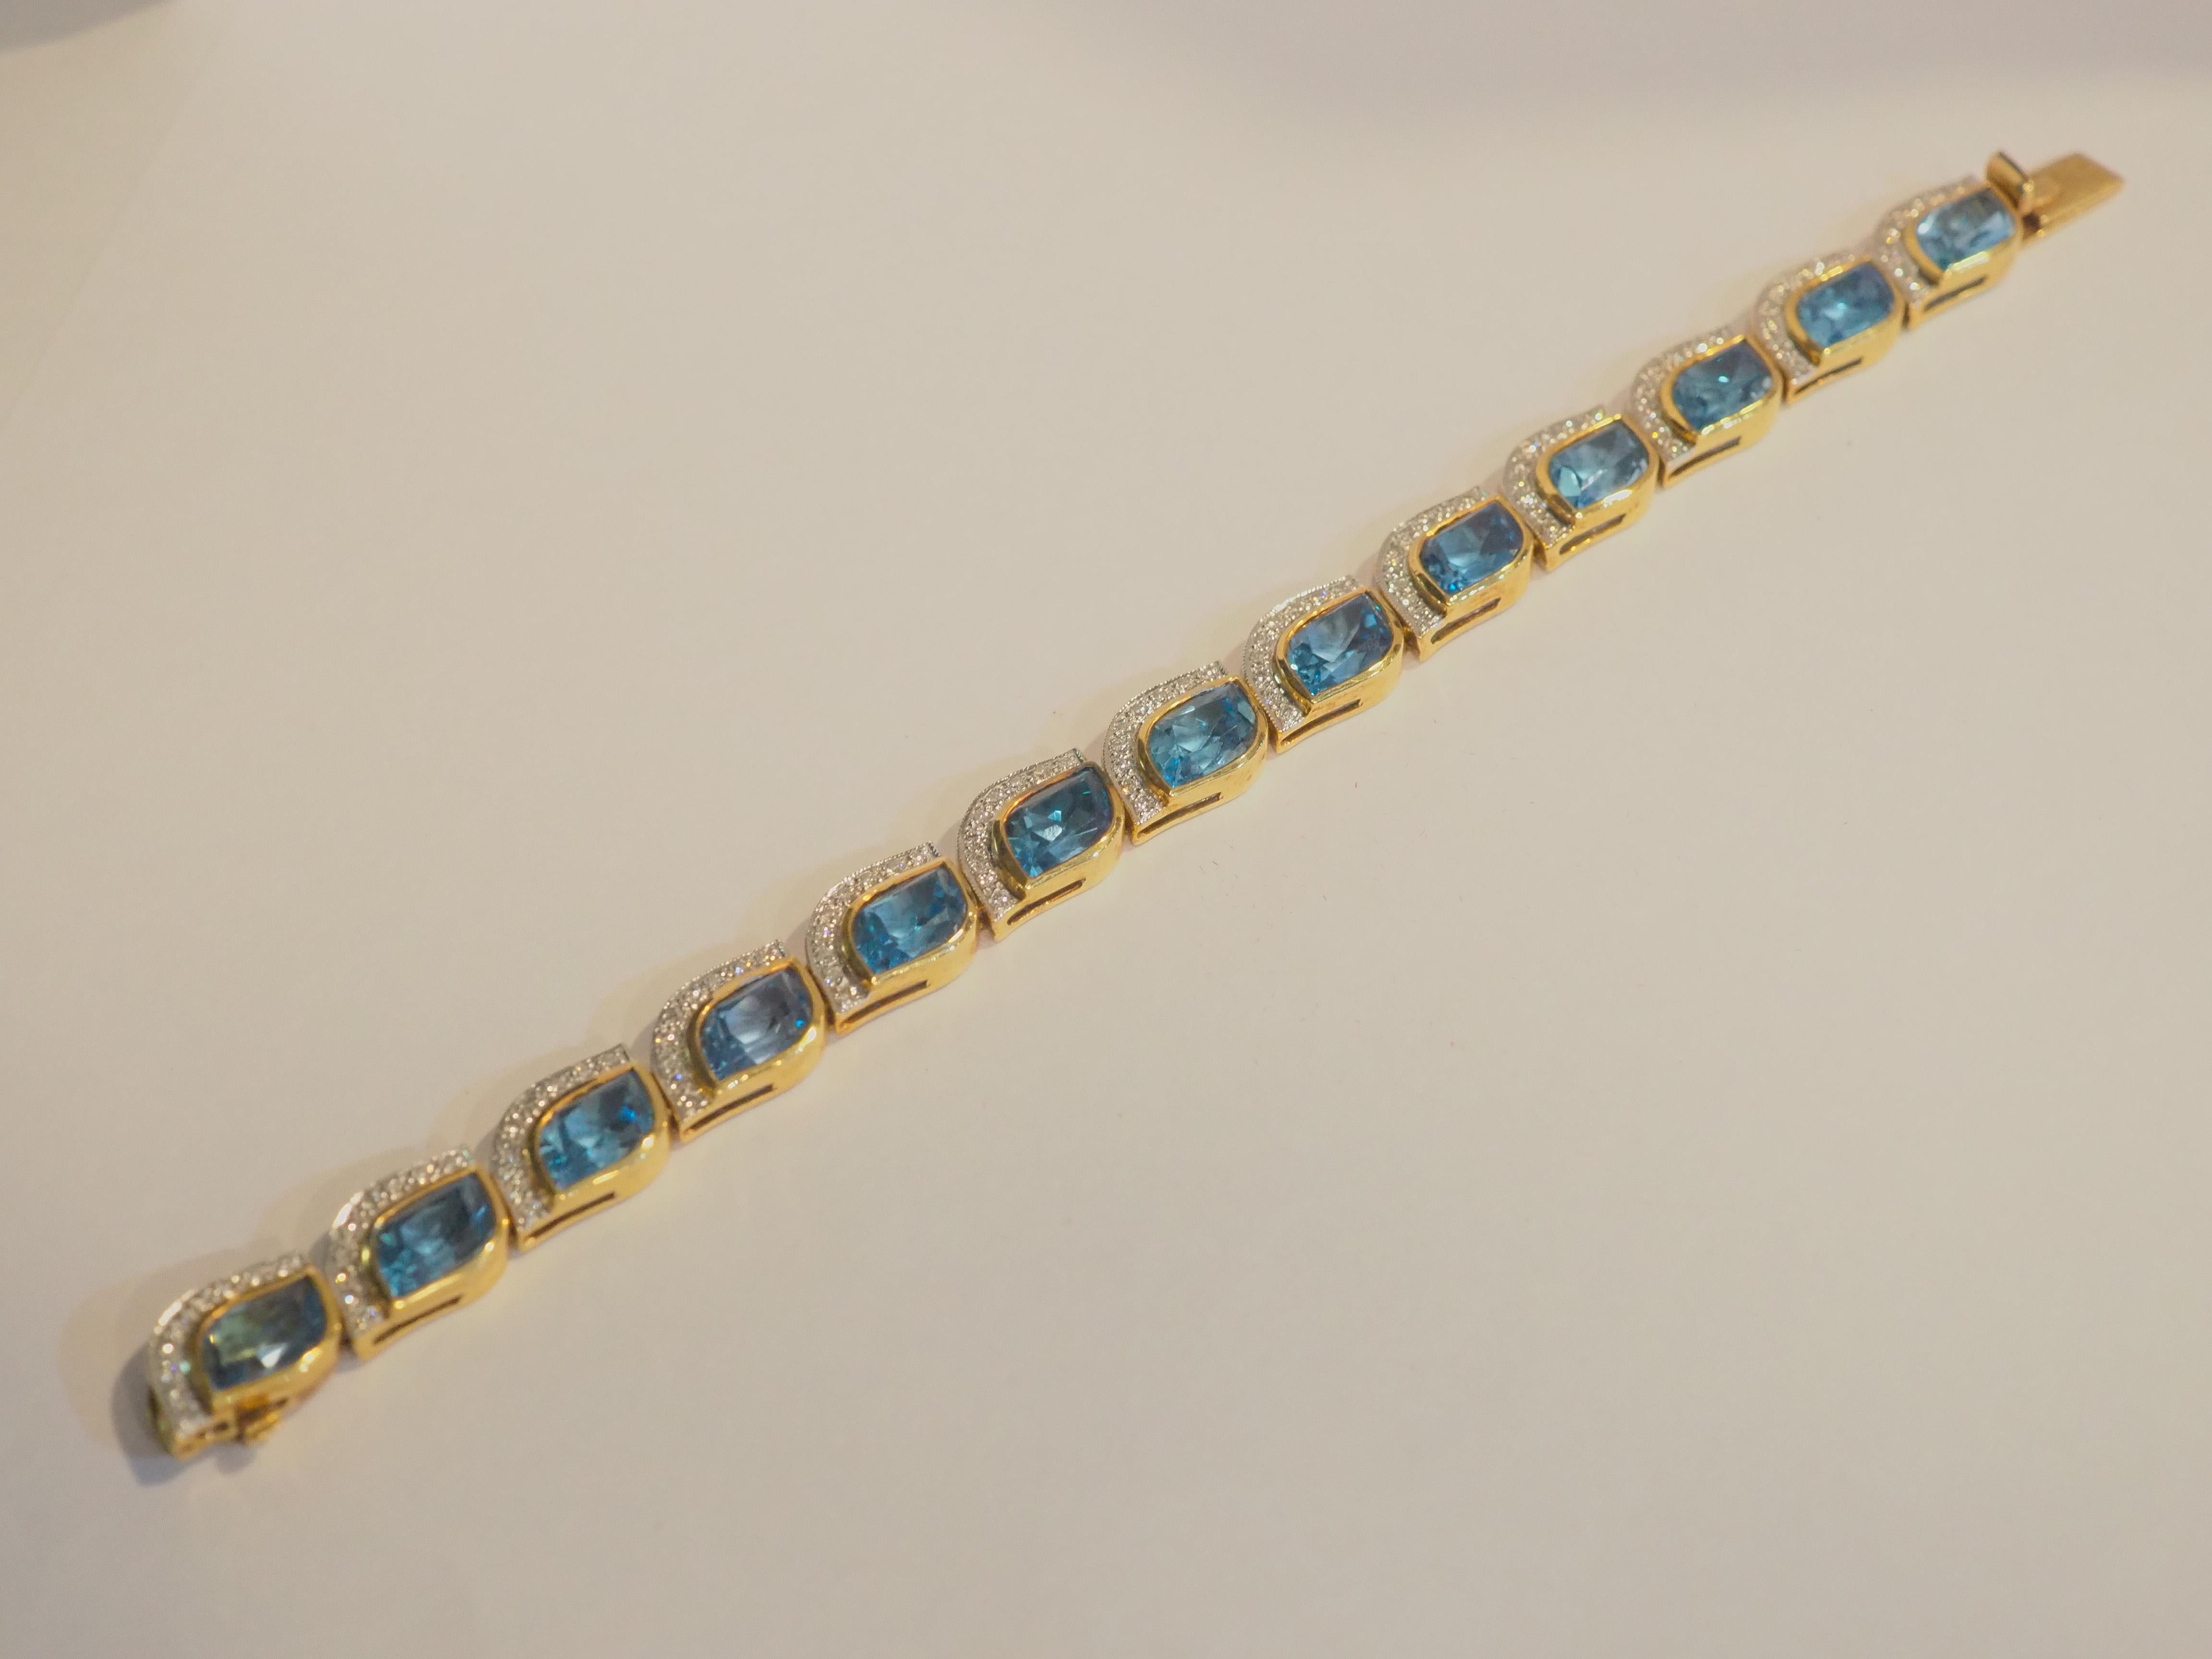 18K Gold 30.16 Carat Mixed Cut Blue Topaz & 1.41ct Diamond Bracelet In Excellent Condition For Sale In เกาะสมุย, TH